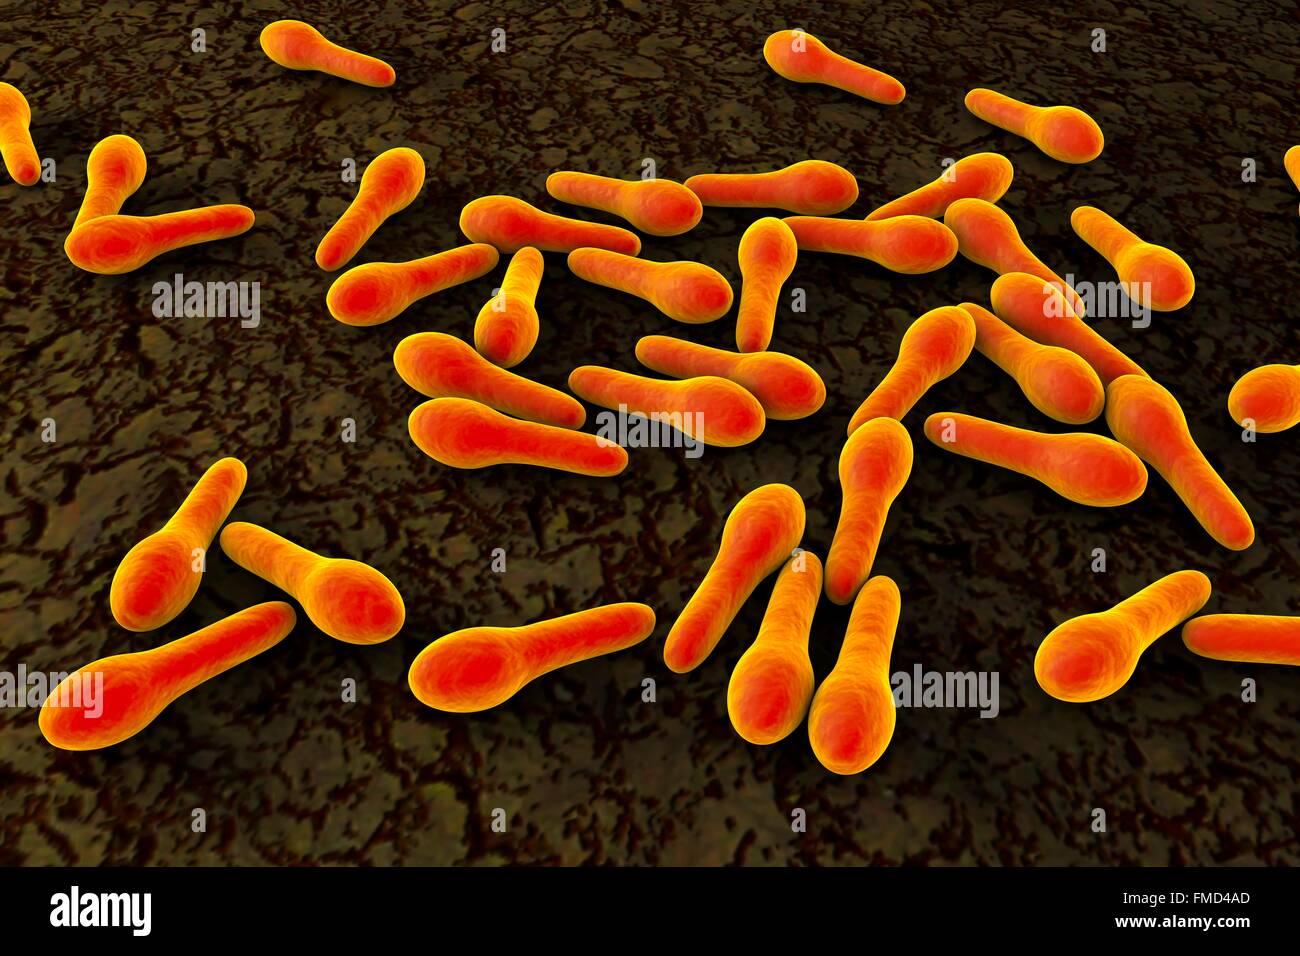 Clostridium tetani bacteria, computer illustration. Clostridium tetani bacteria cause tetanus which develops as a result of contamination of wound by spores of bacteria, mostly found in soil. Stock Photo